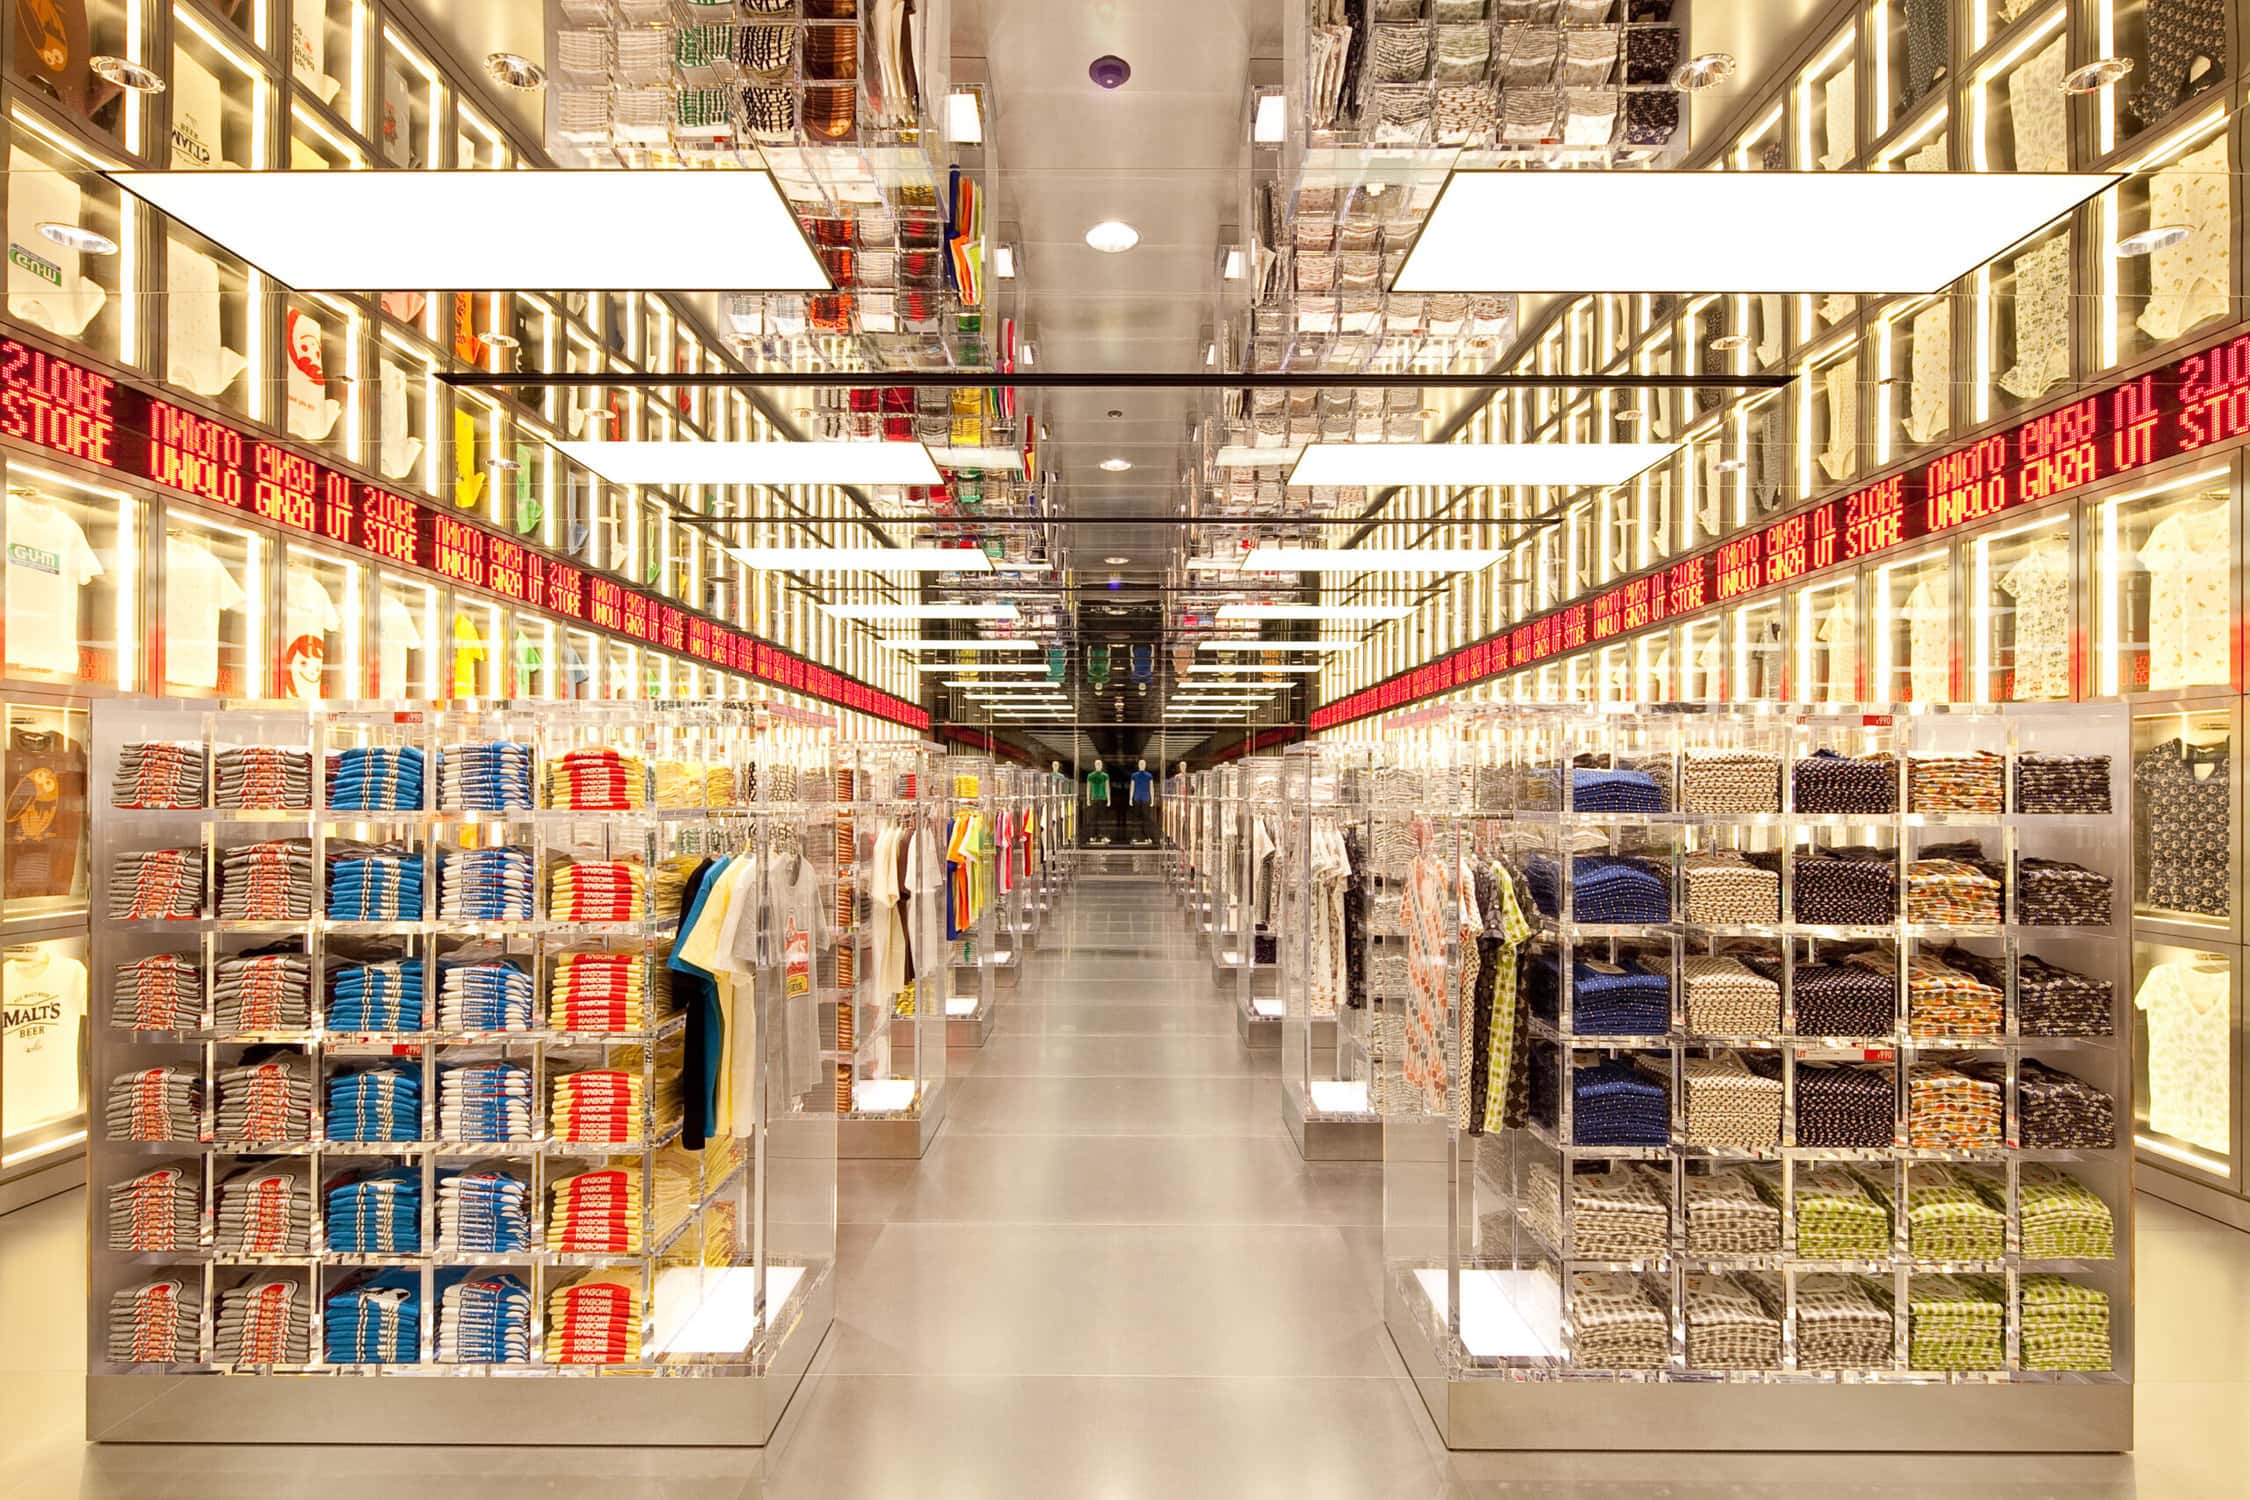 Swap your old clothes for discount coupons at Uniqlo Japan